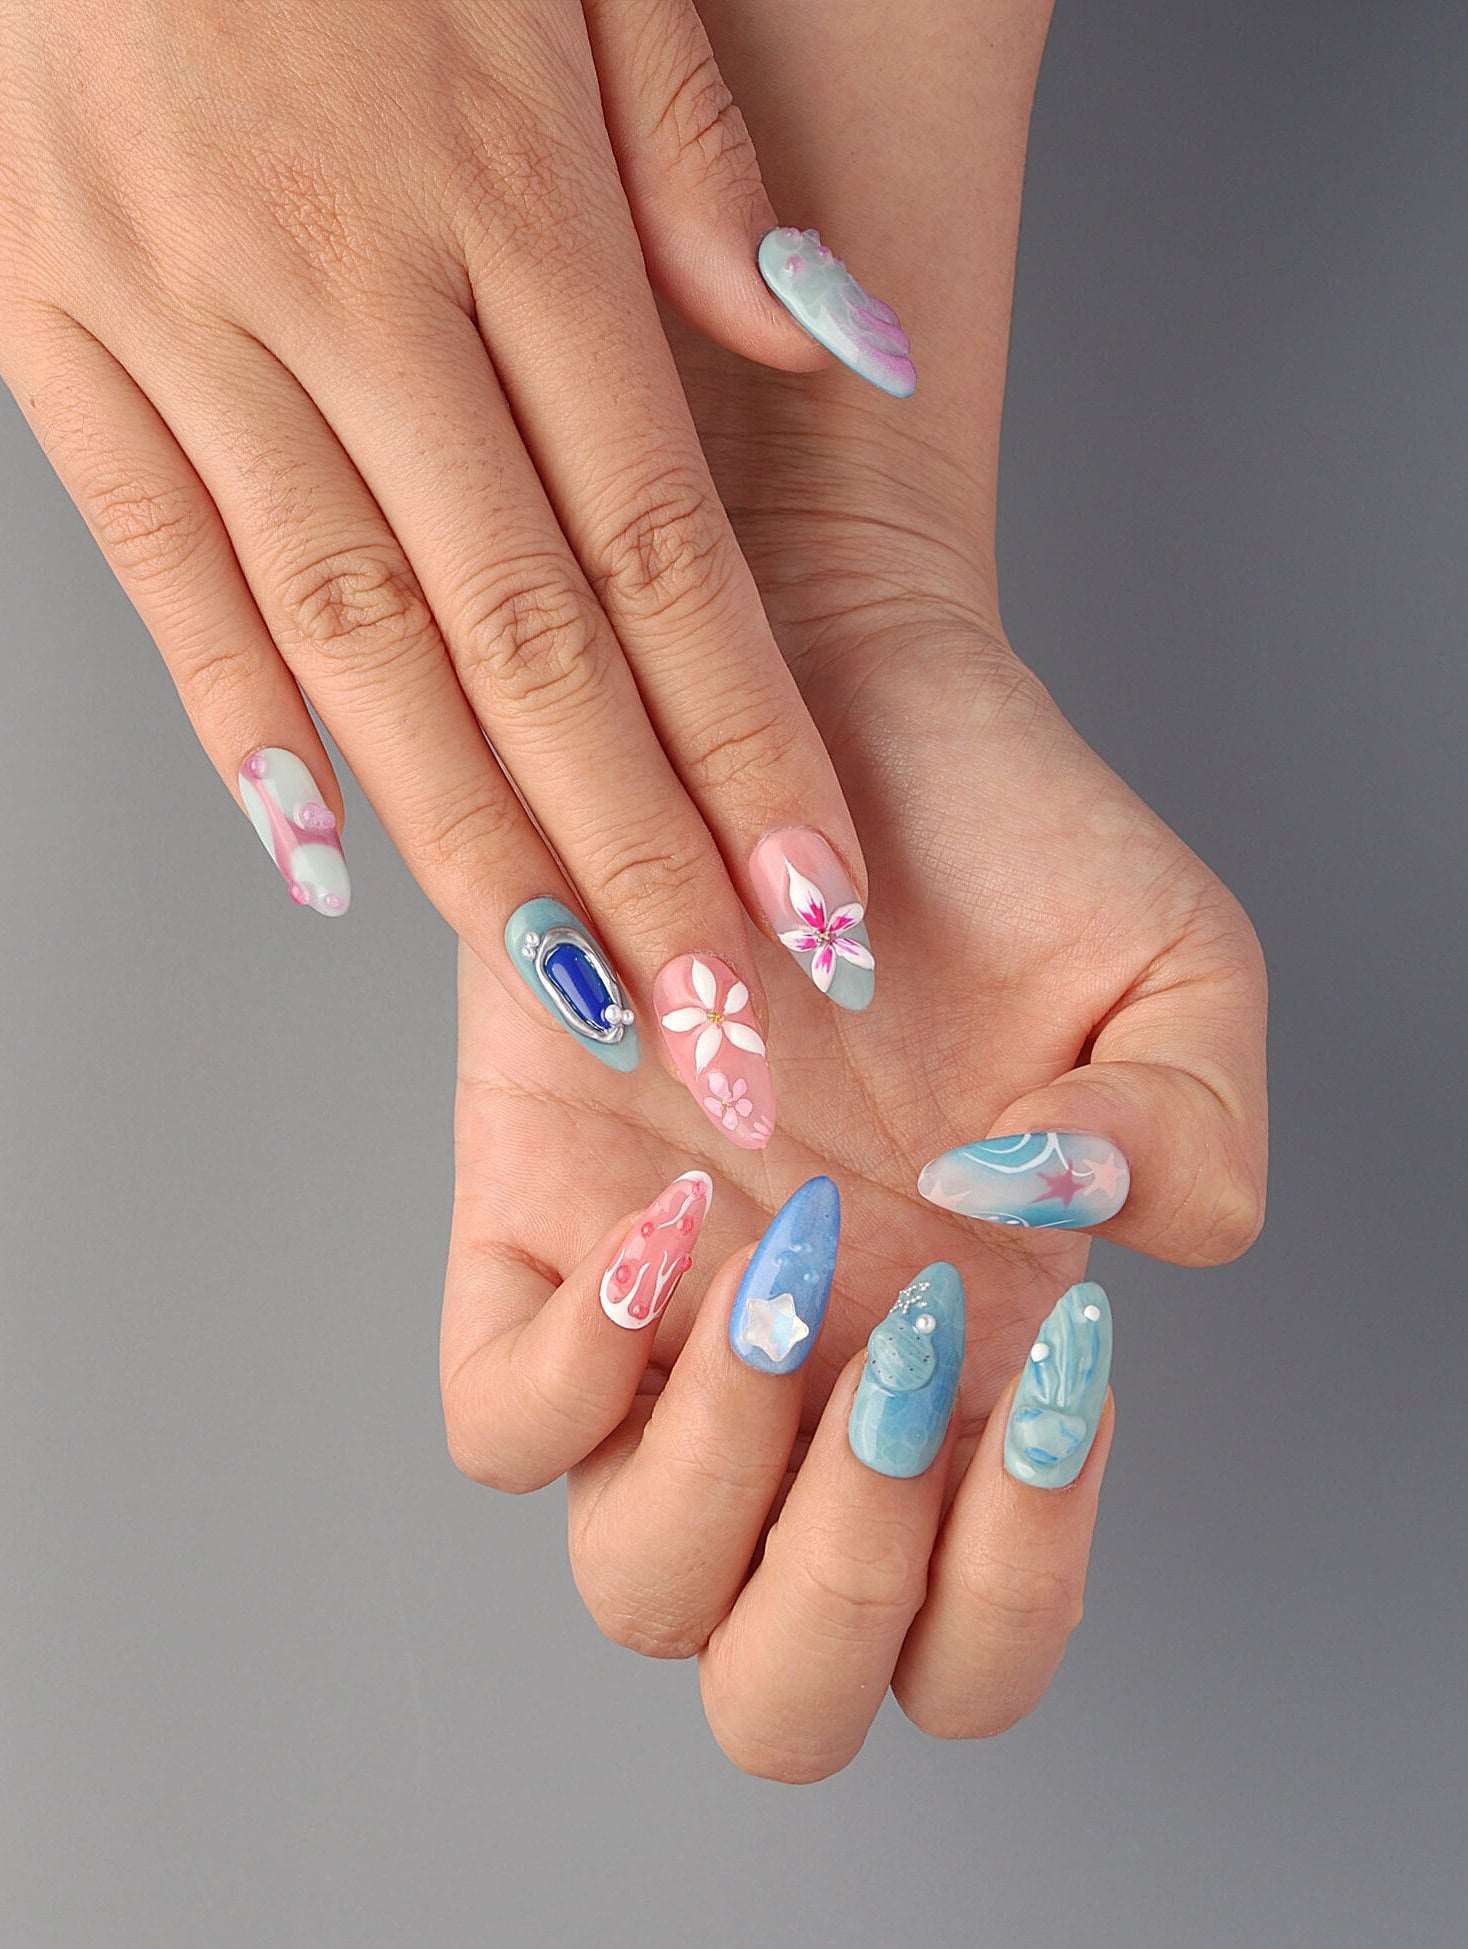 Colorful Free Style Handmade Summer Press On Nails - Flower Beach Design